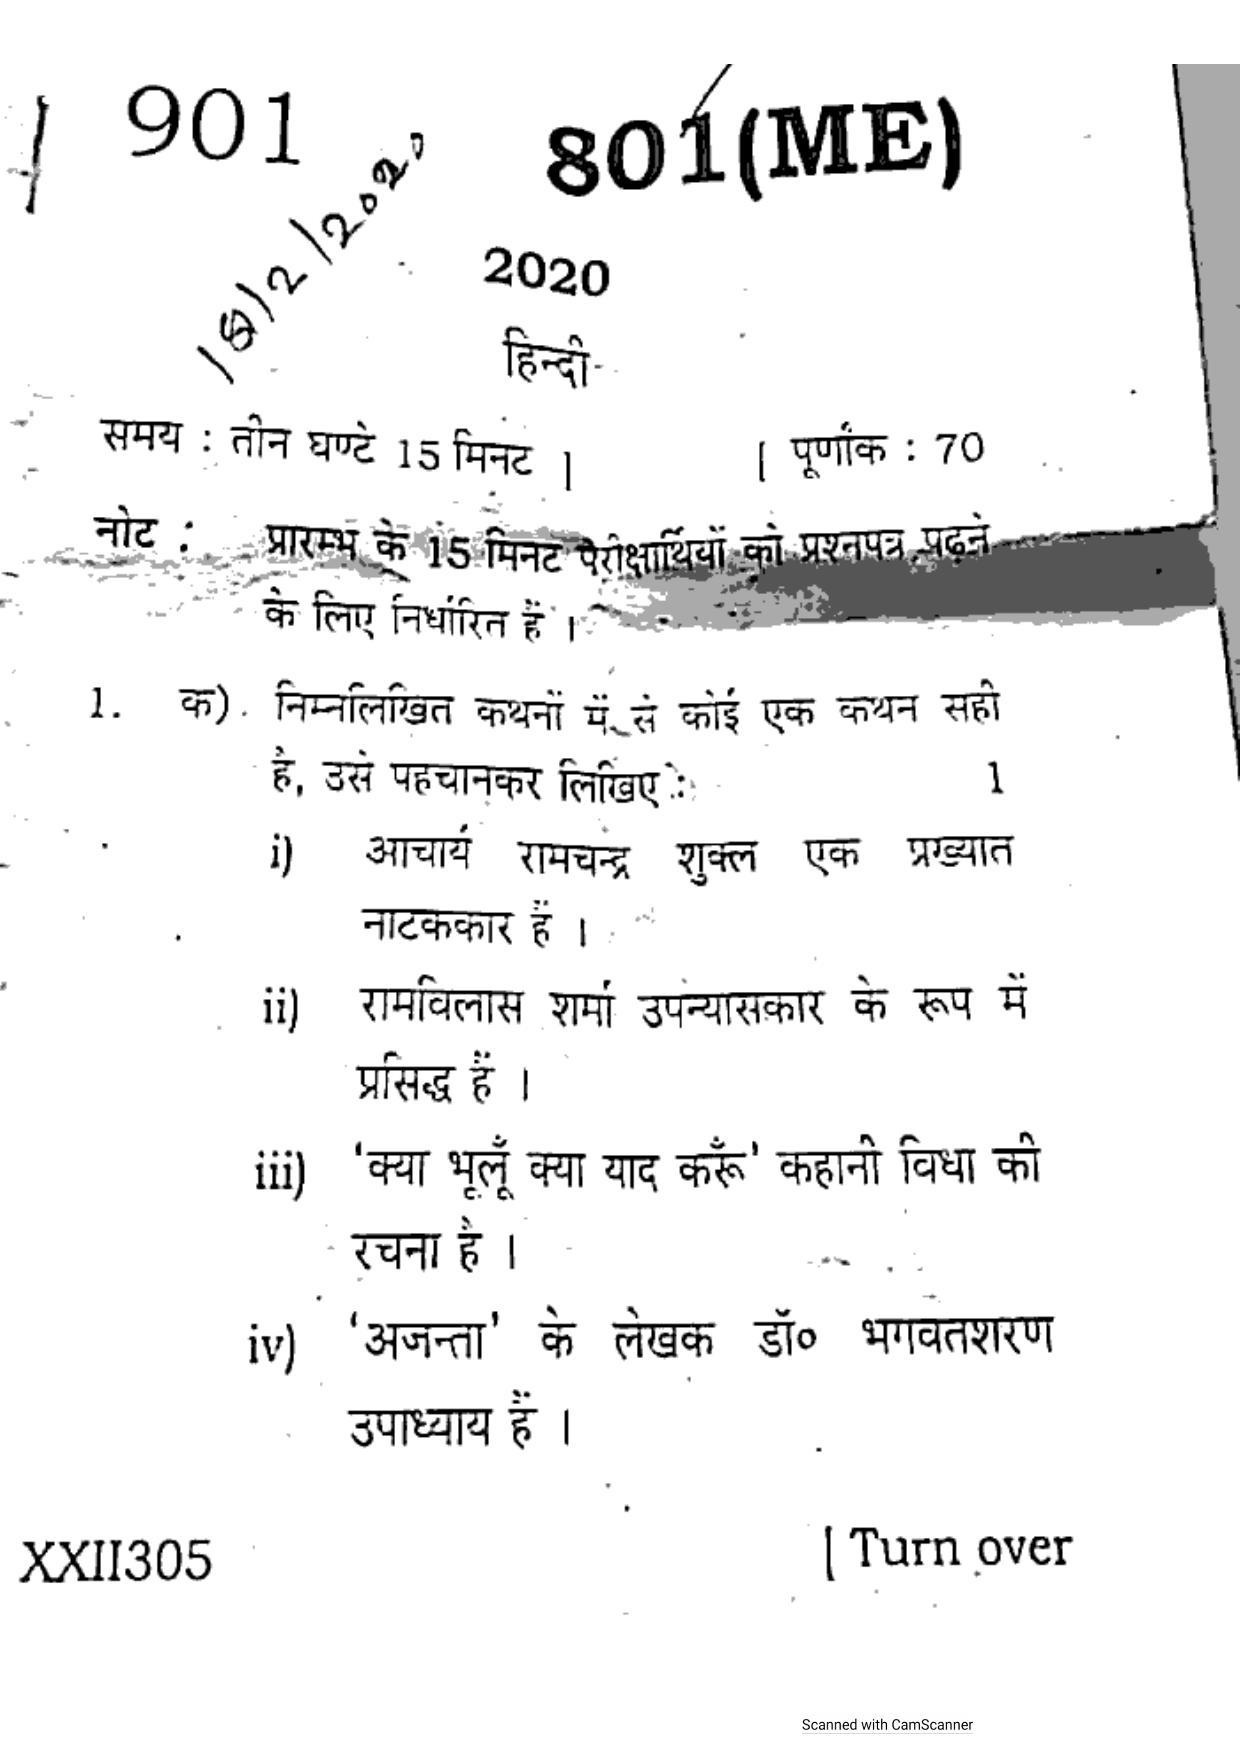 UP Board Previous Year Question Paper Class 10 Hindi (801 ME) – 2020 - Page 1